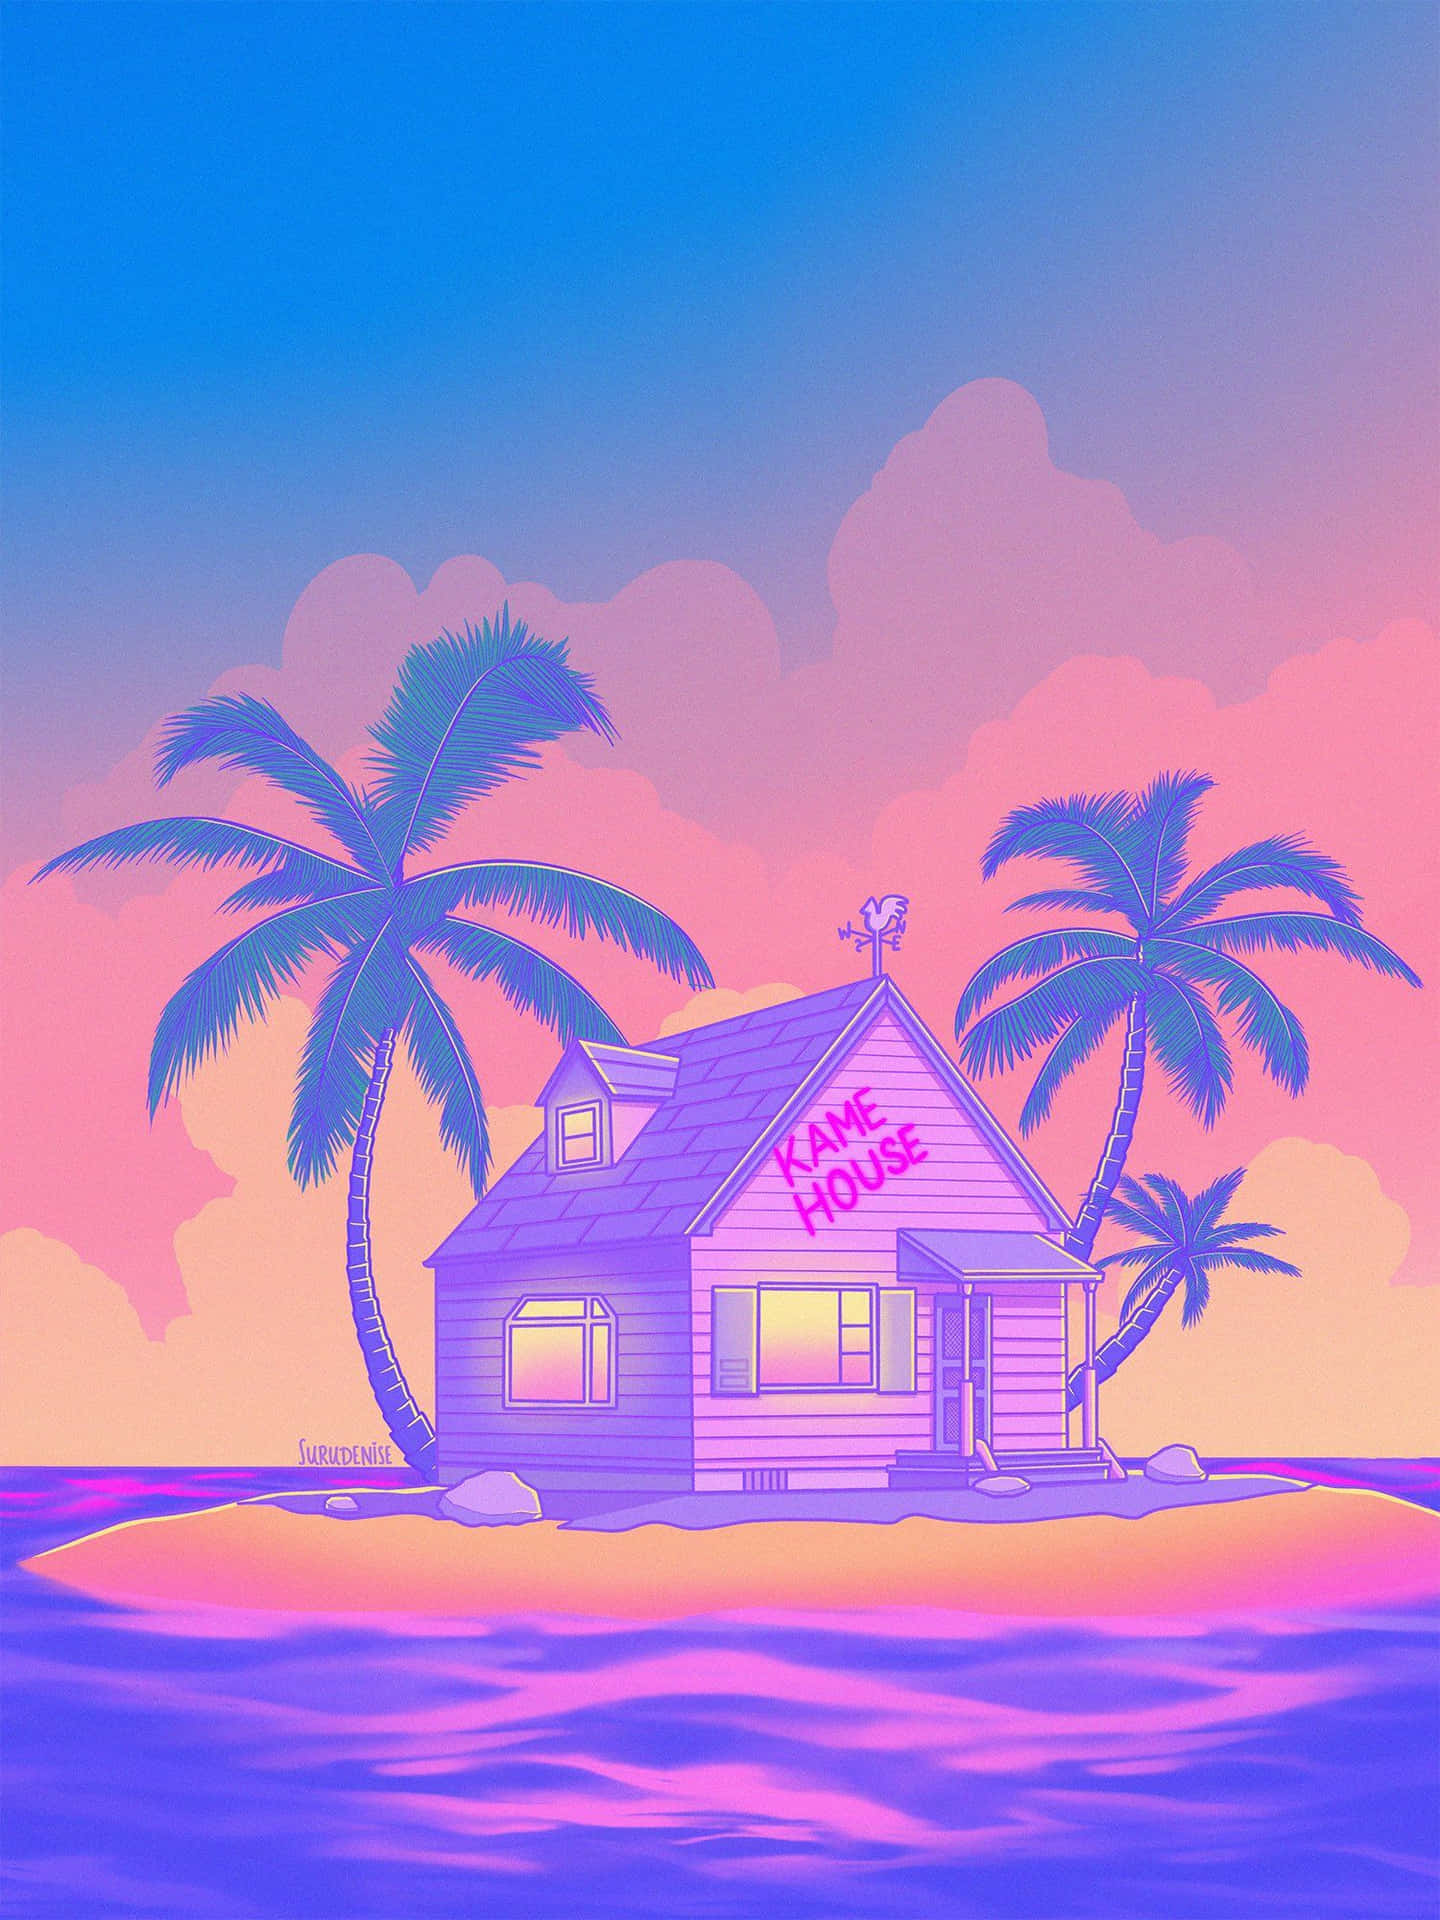 Enter Trap House and get lost in the wild beats Wallpaper